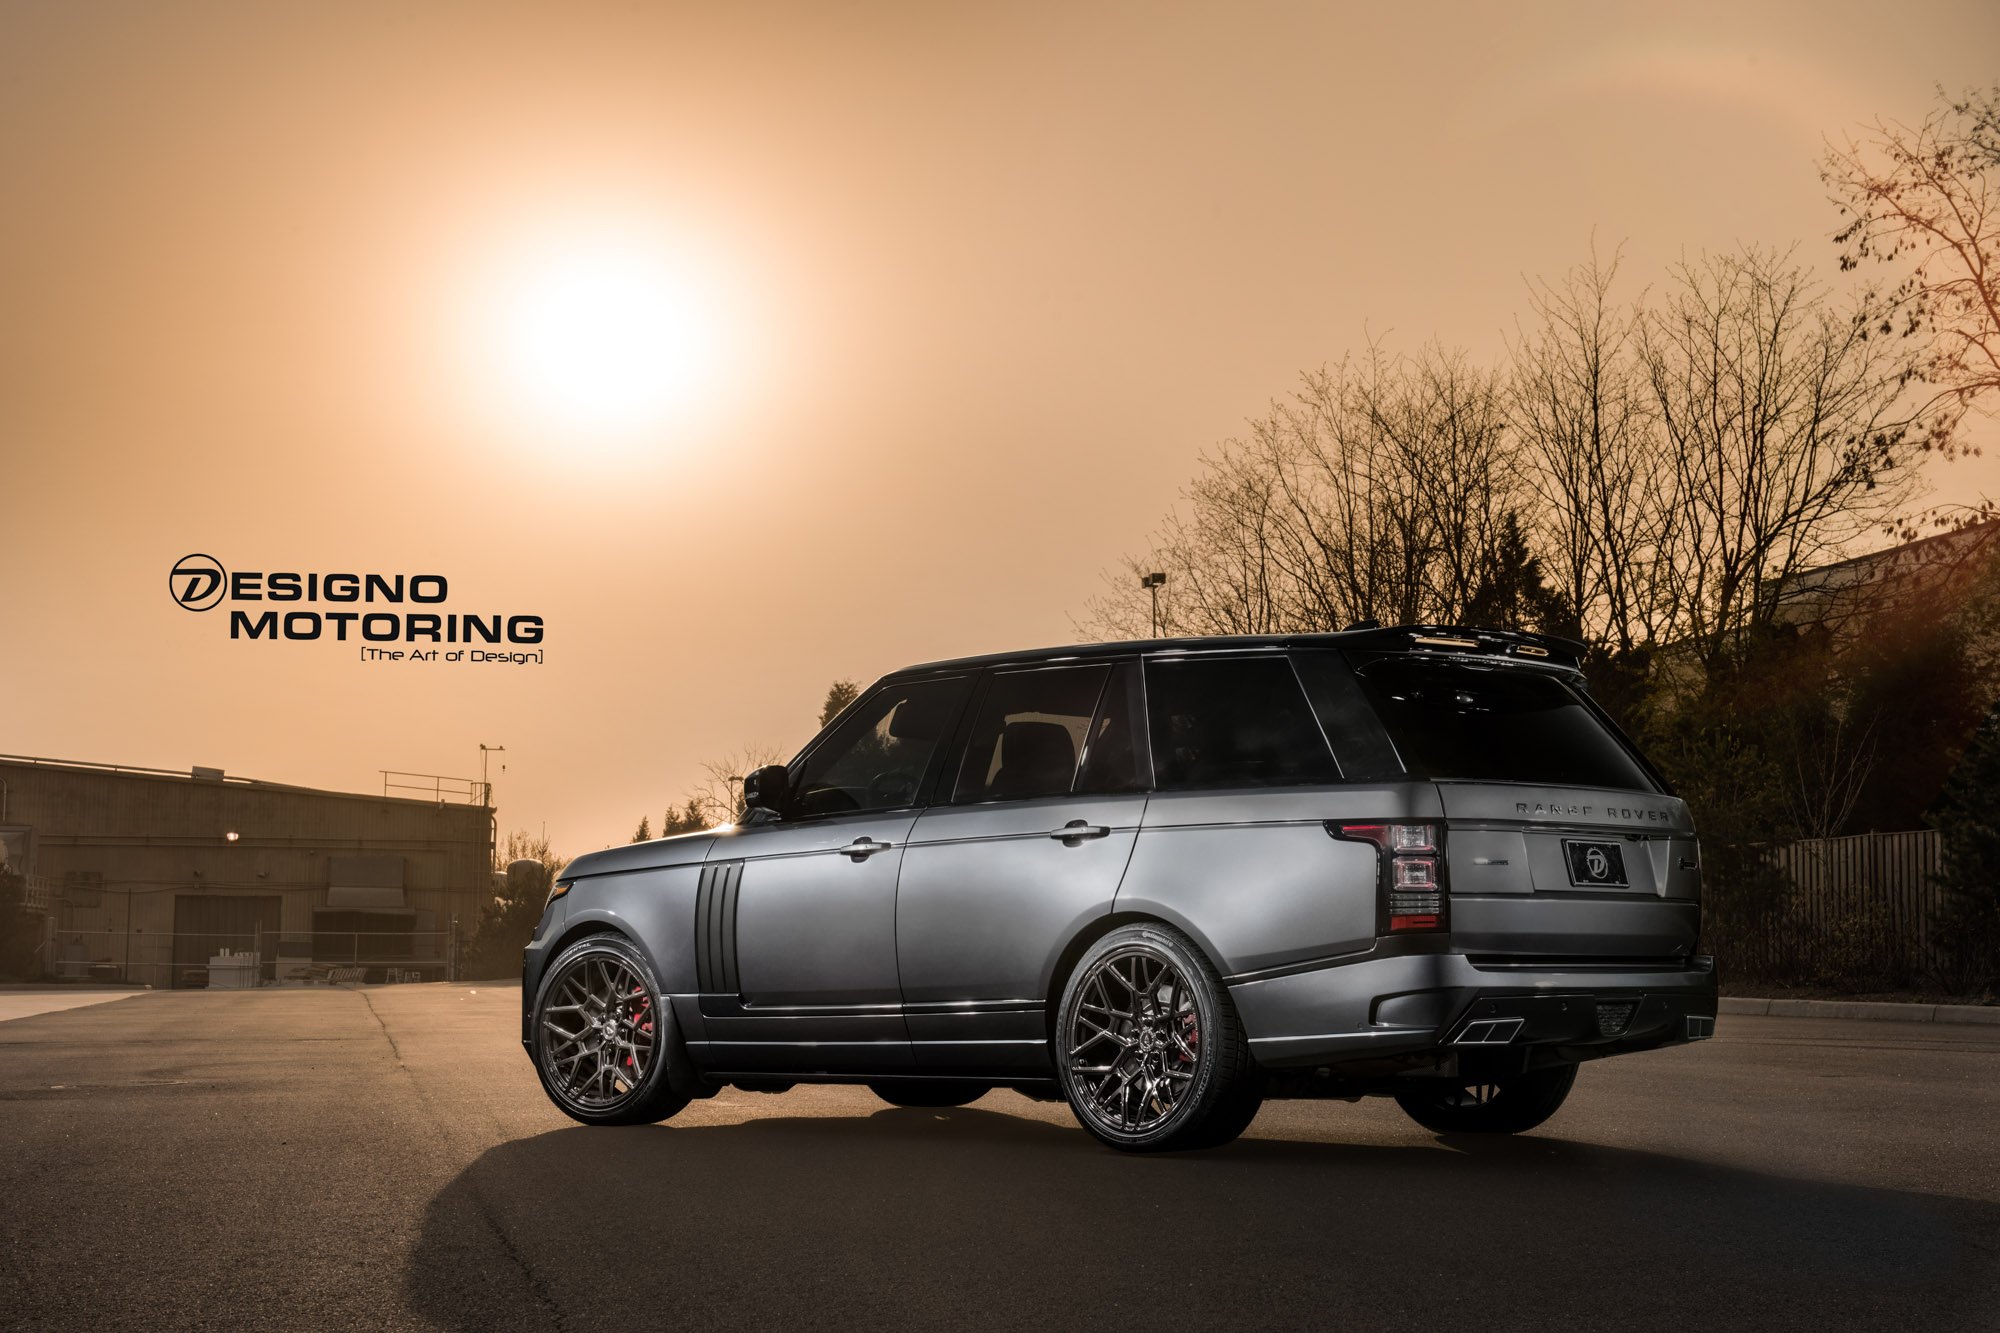 Aftermarket Rear Diffuser on Gray Range Rover - Photo by Vossen